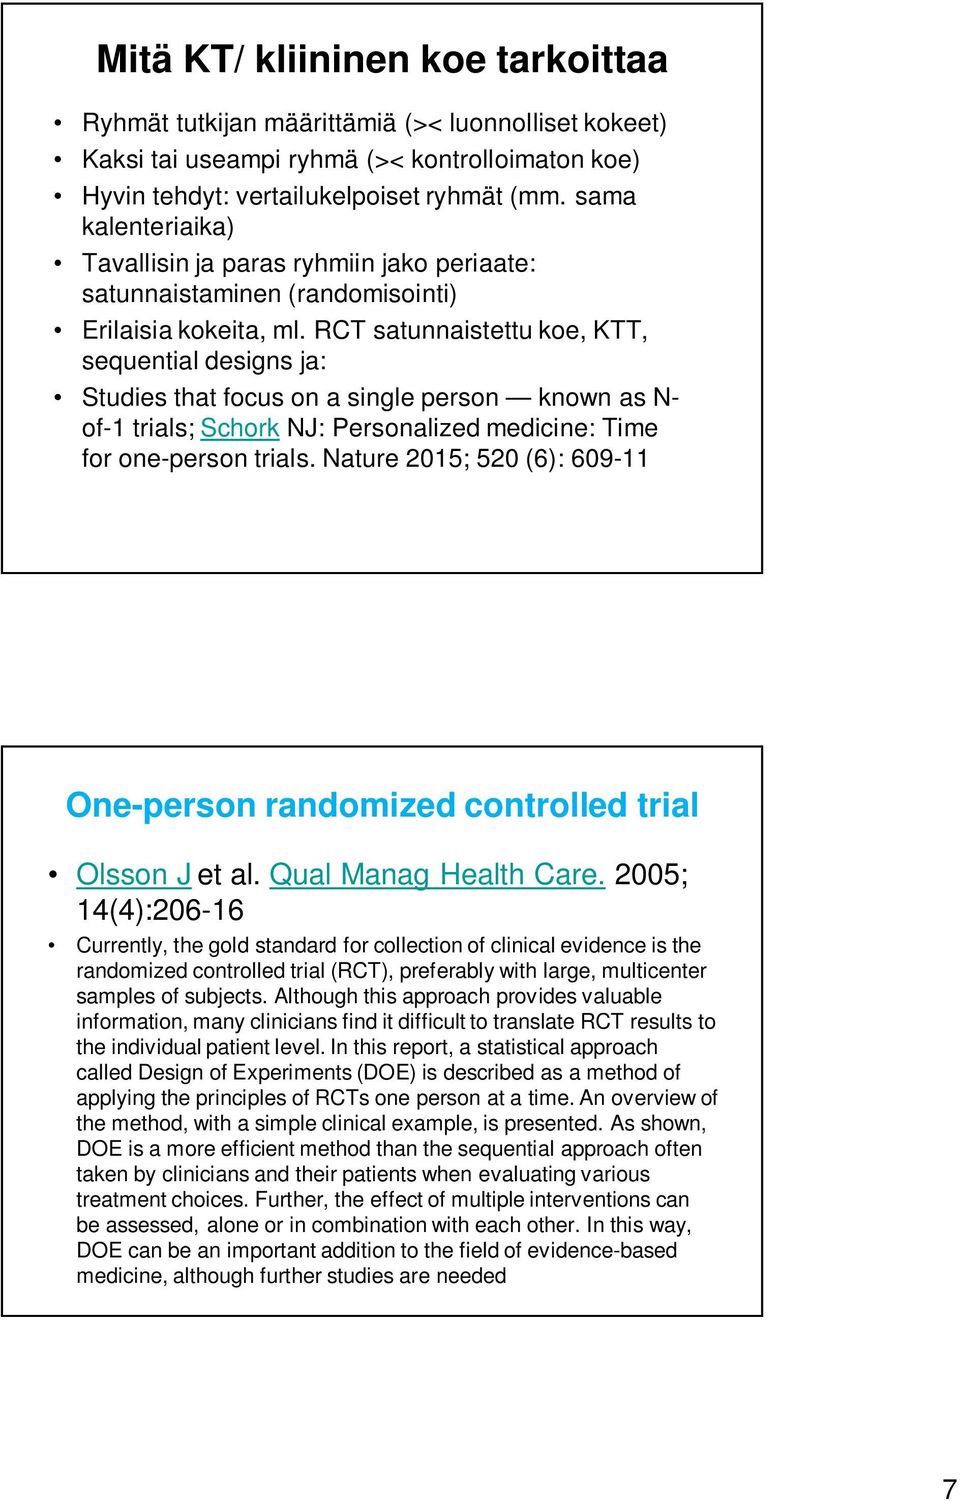 RCT satunnaistettu koe, KTT, sequential designs ja: Studies that focus on a single person known as N- of-1 trials; Schork NJ: Personalized medicine: Time for one-person trials.